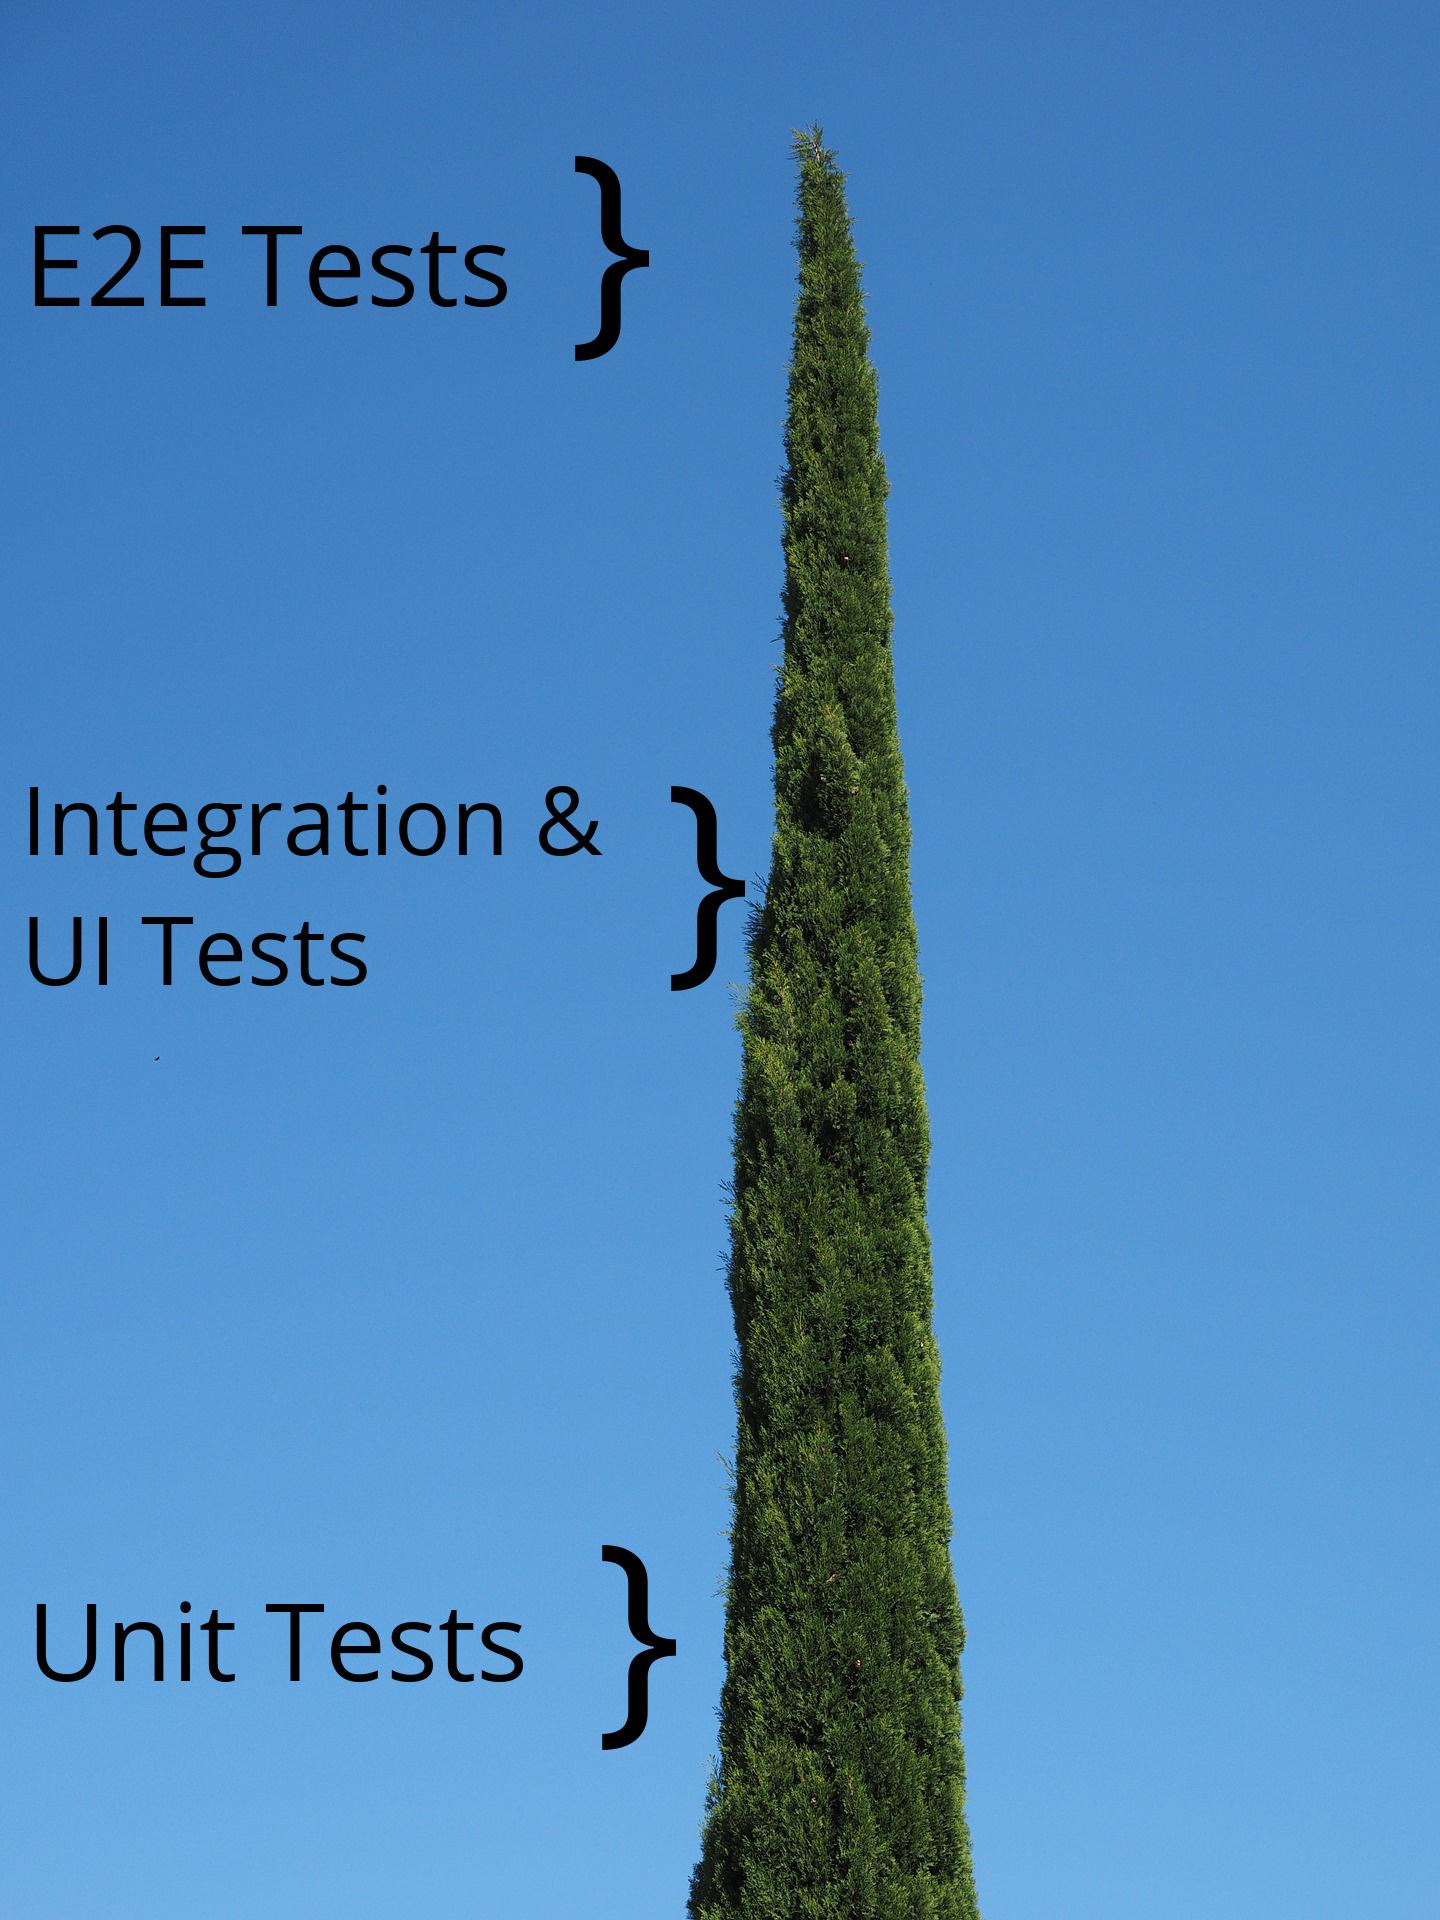 Cypresses as symbolic image for the test pyramid optimally implemented with Cypress as testing framework